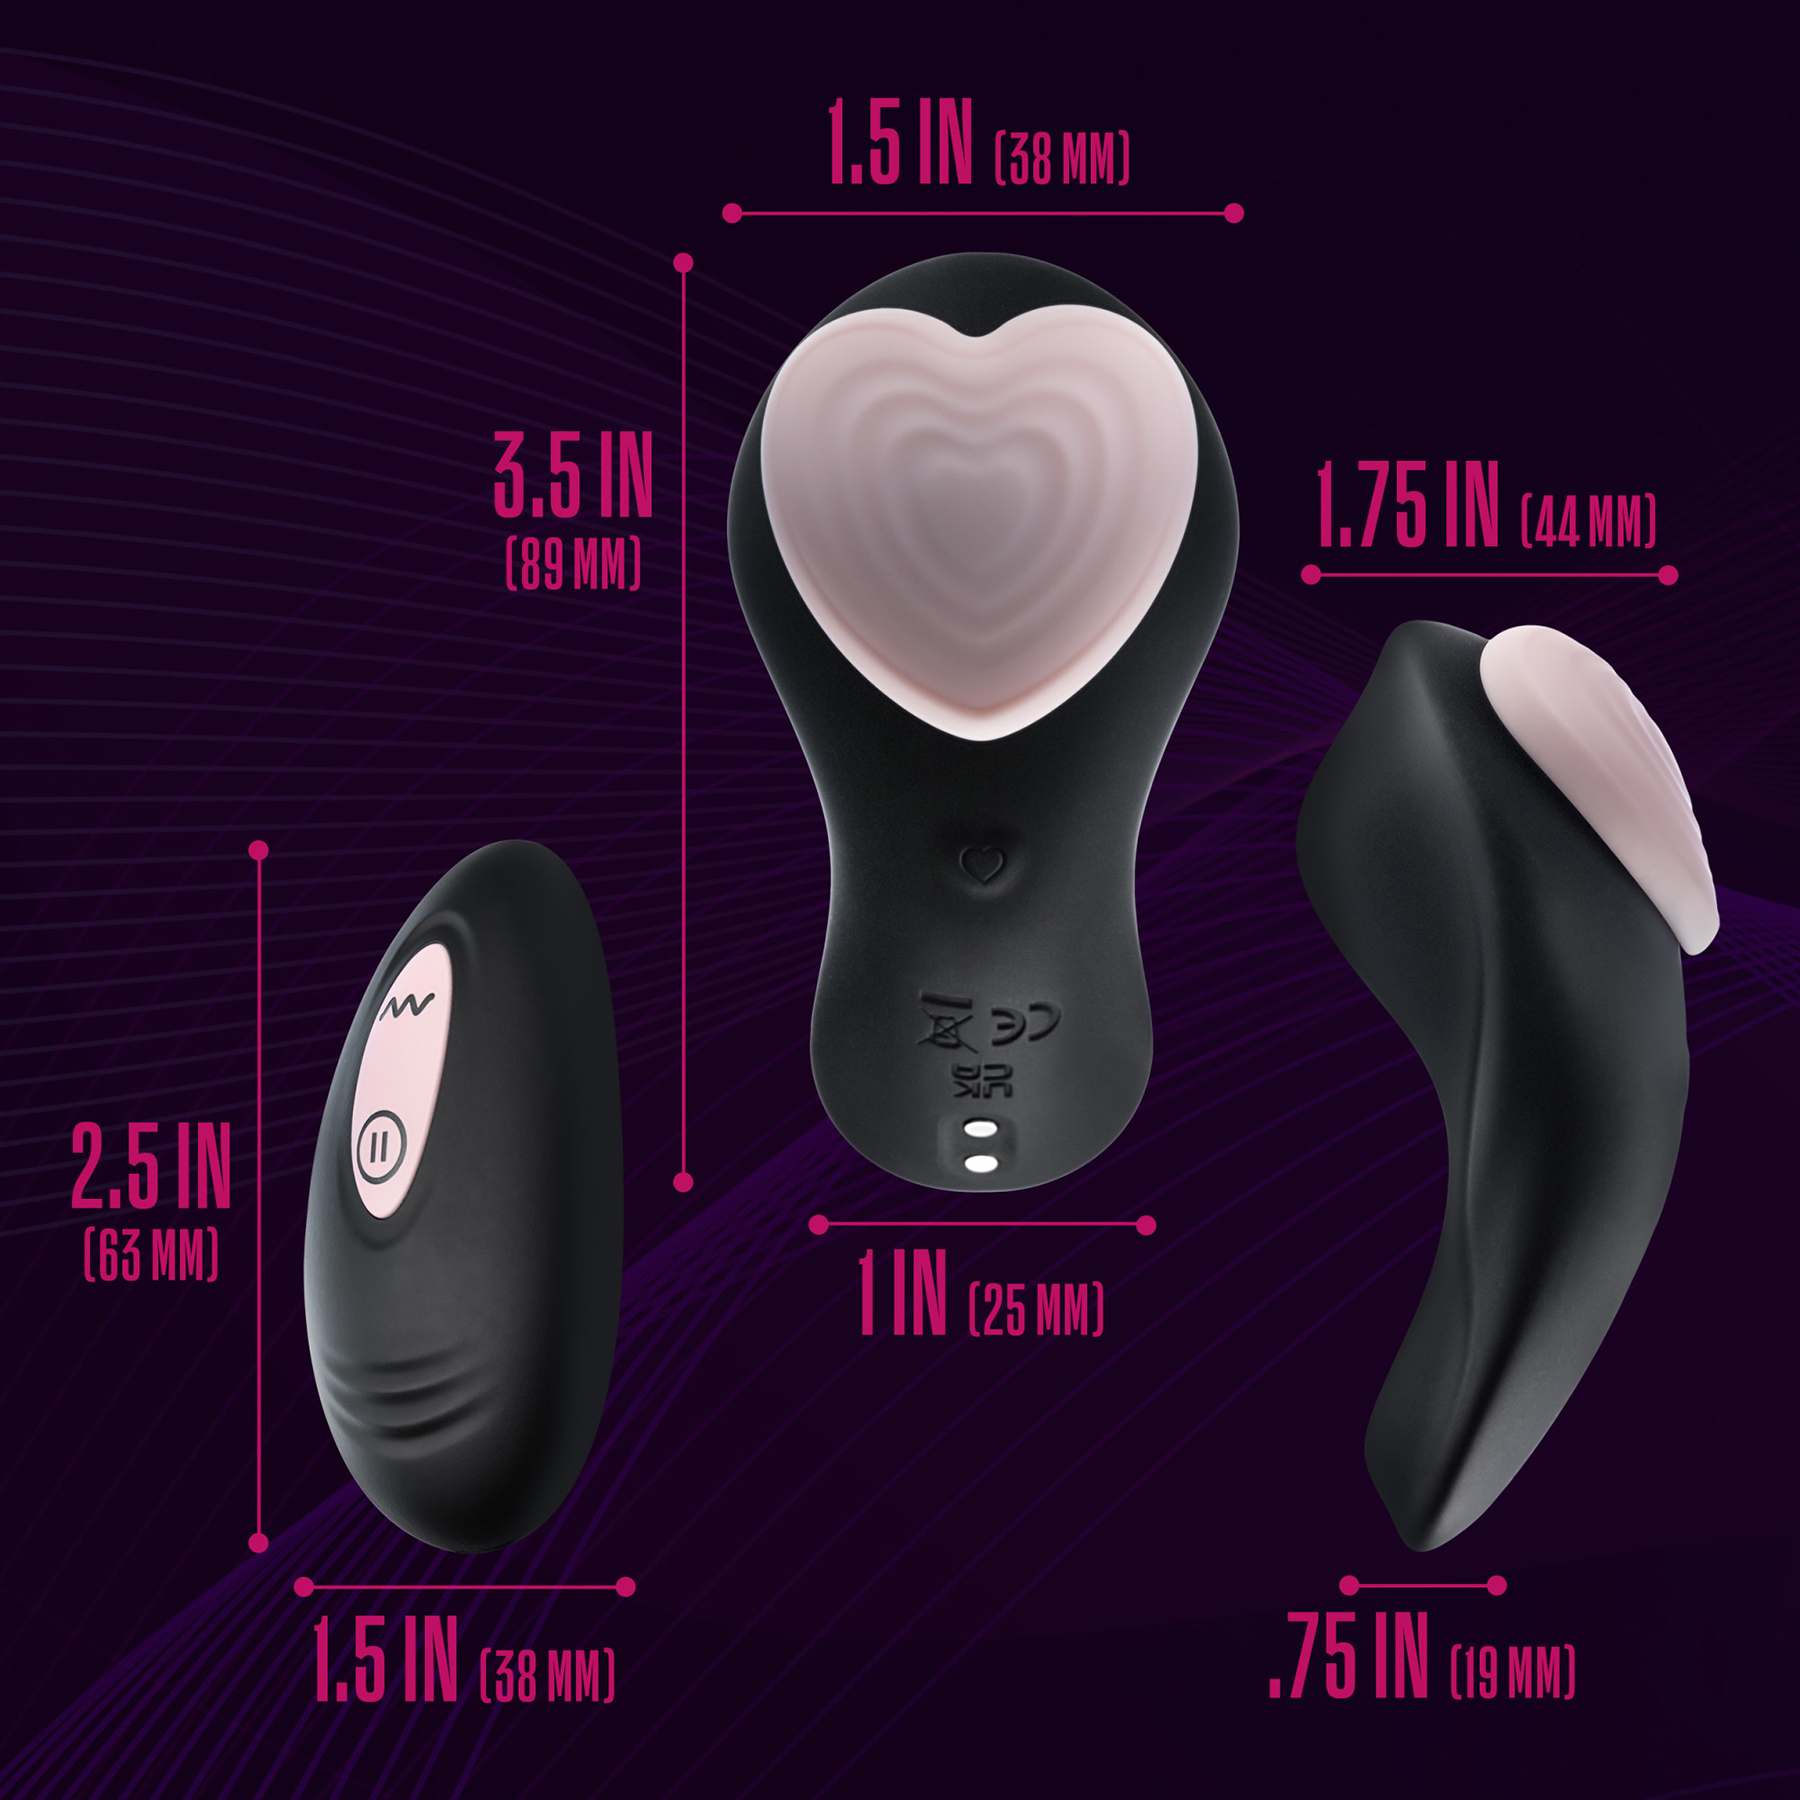 Temptasia Heartbeat Silicone Rechargeable Panty Vibe With Remote - Measurements